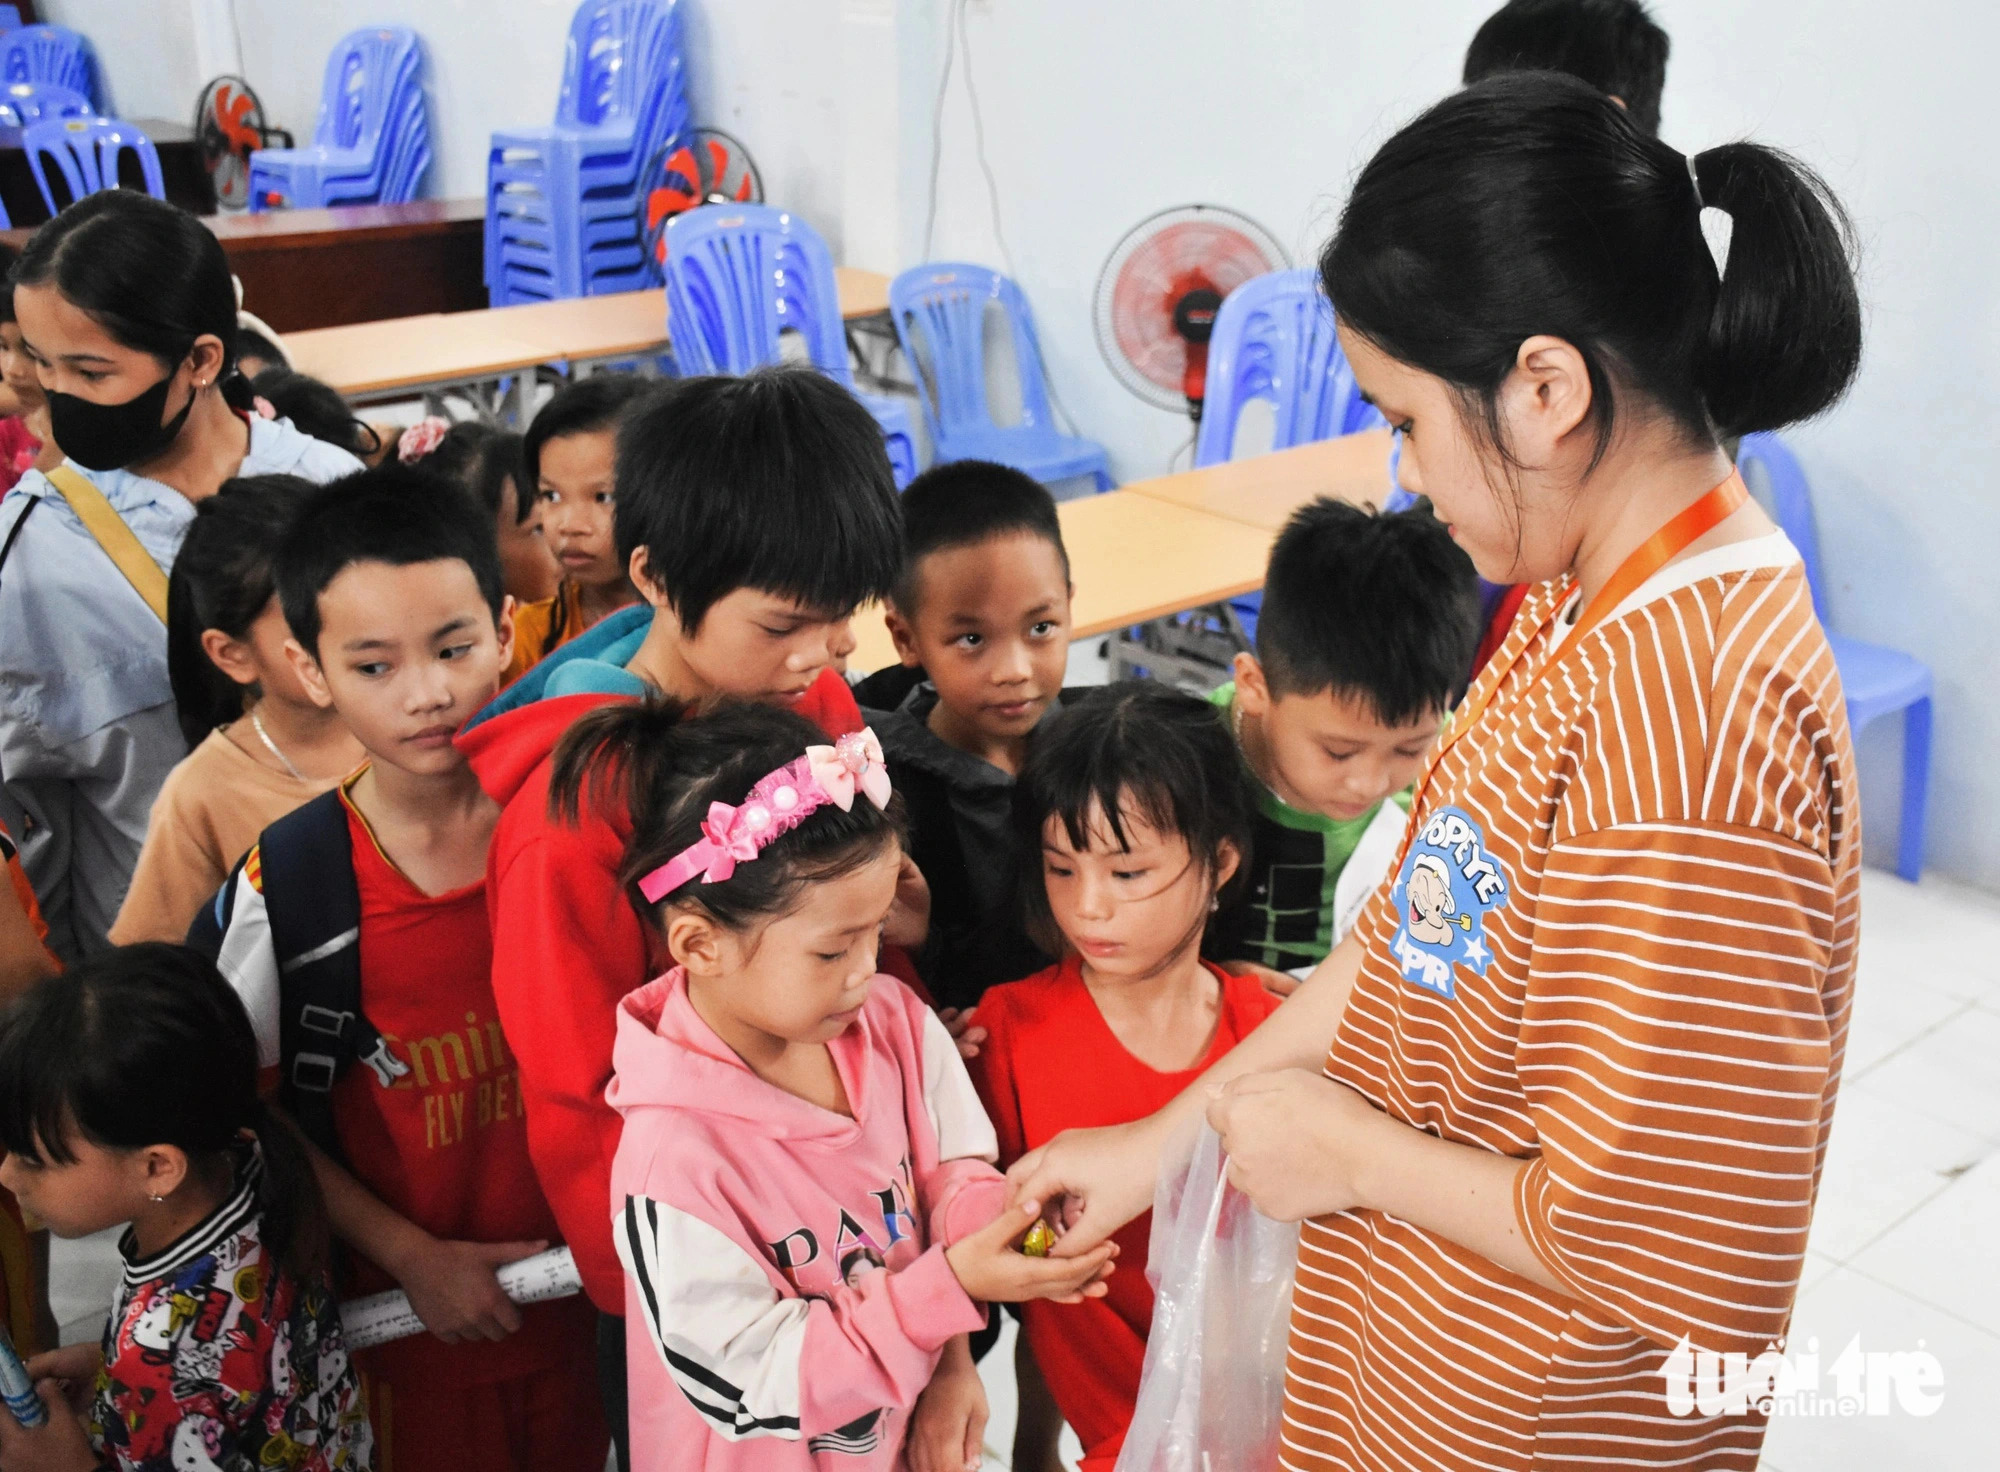 The children receive little gifts after each class. Photo: Tran Hoai / Tuoi Tre